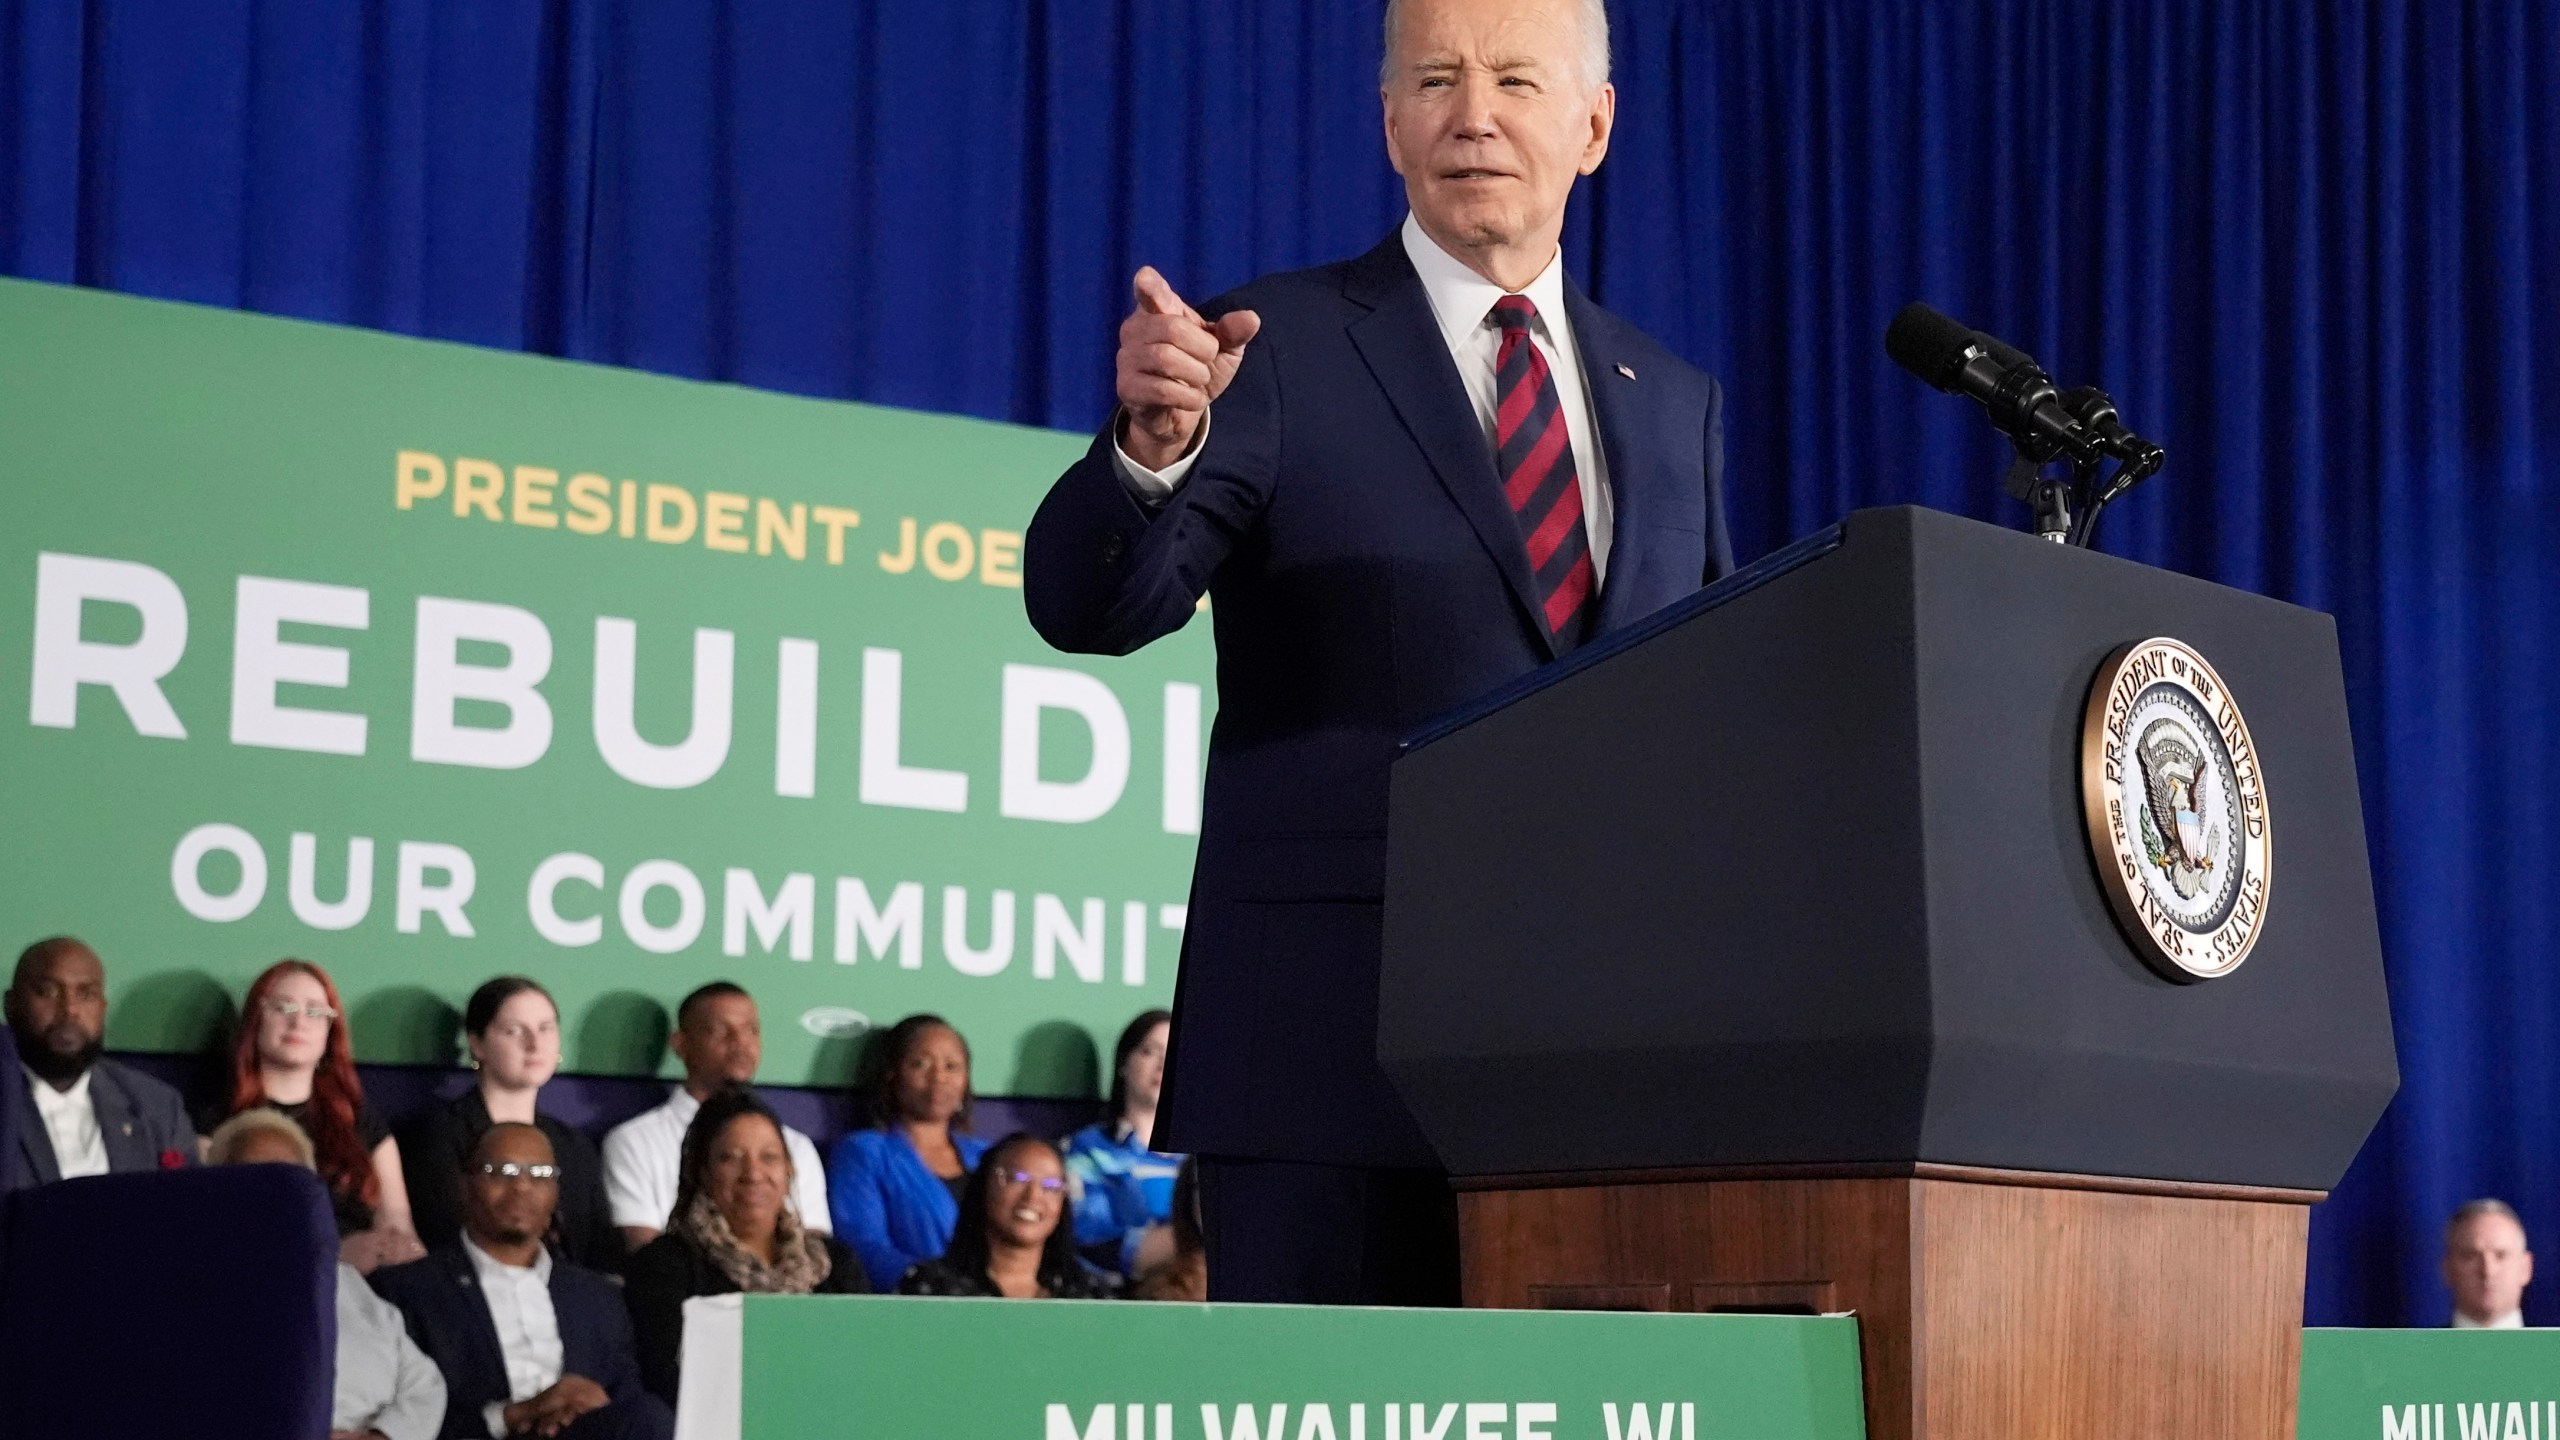 FILE - President Joe Biden speaks at an event, March 13, 2024, in Milwaukee. Voters in the pivotal swing state of Wisconsin and three northeastern states will have a chance to indicate their support or opposition to their parties' presumptive nominees in presidential primaries Tuesday, April 2, 2024. Voters will also decide the fate of two Republican-backed statewide ballot measures that will shape how elections in the state are run and funded. (AP Photo/Jacquelyn Martin, File)